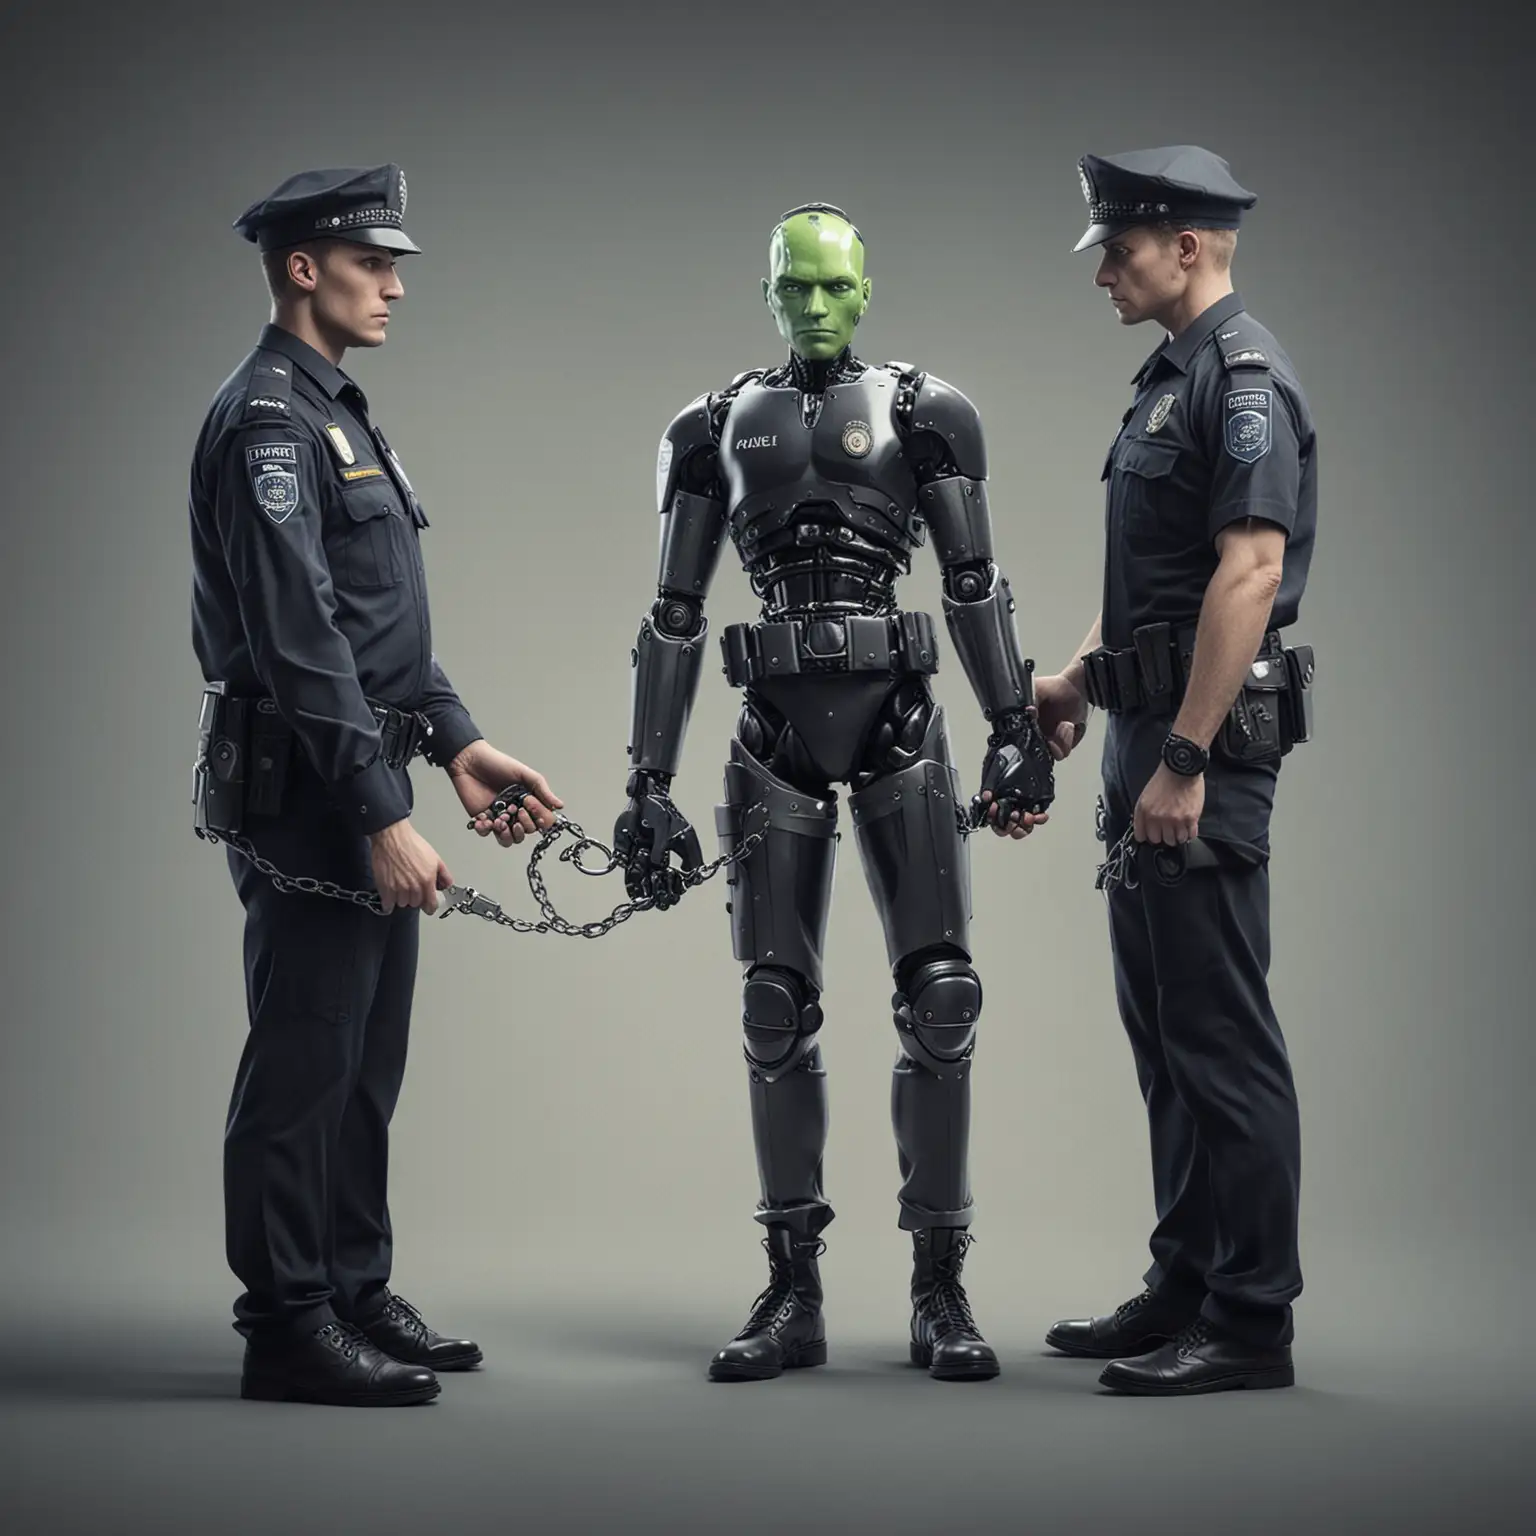 Android Human Arrested by Police Officer with Handcuffs